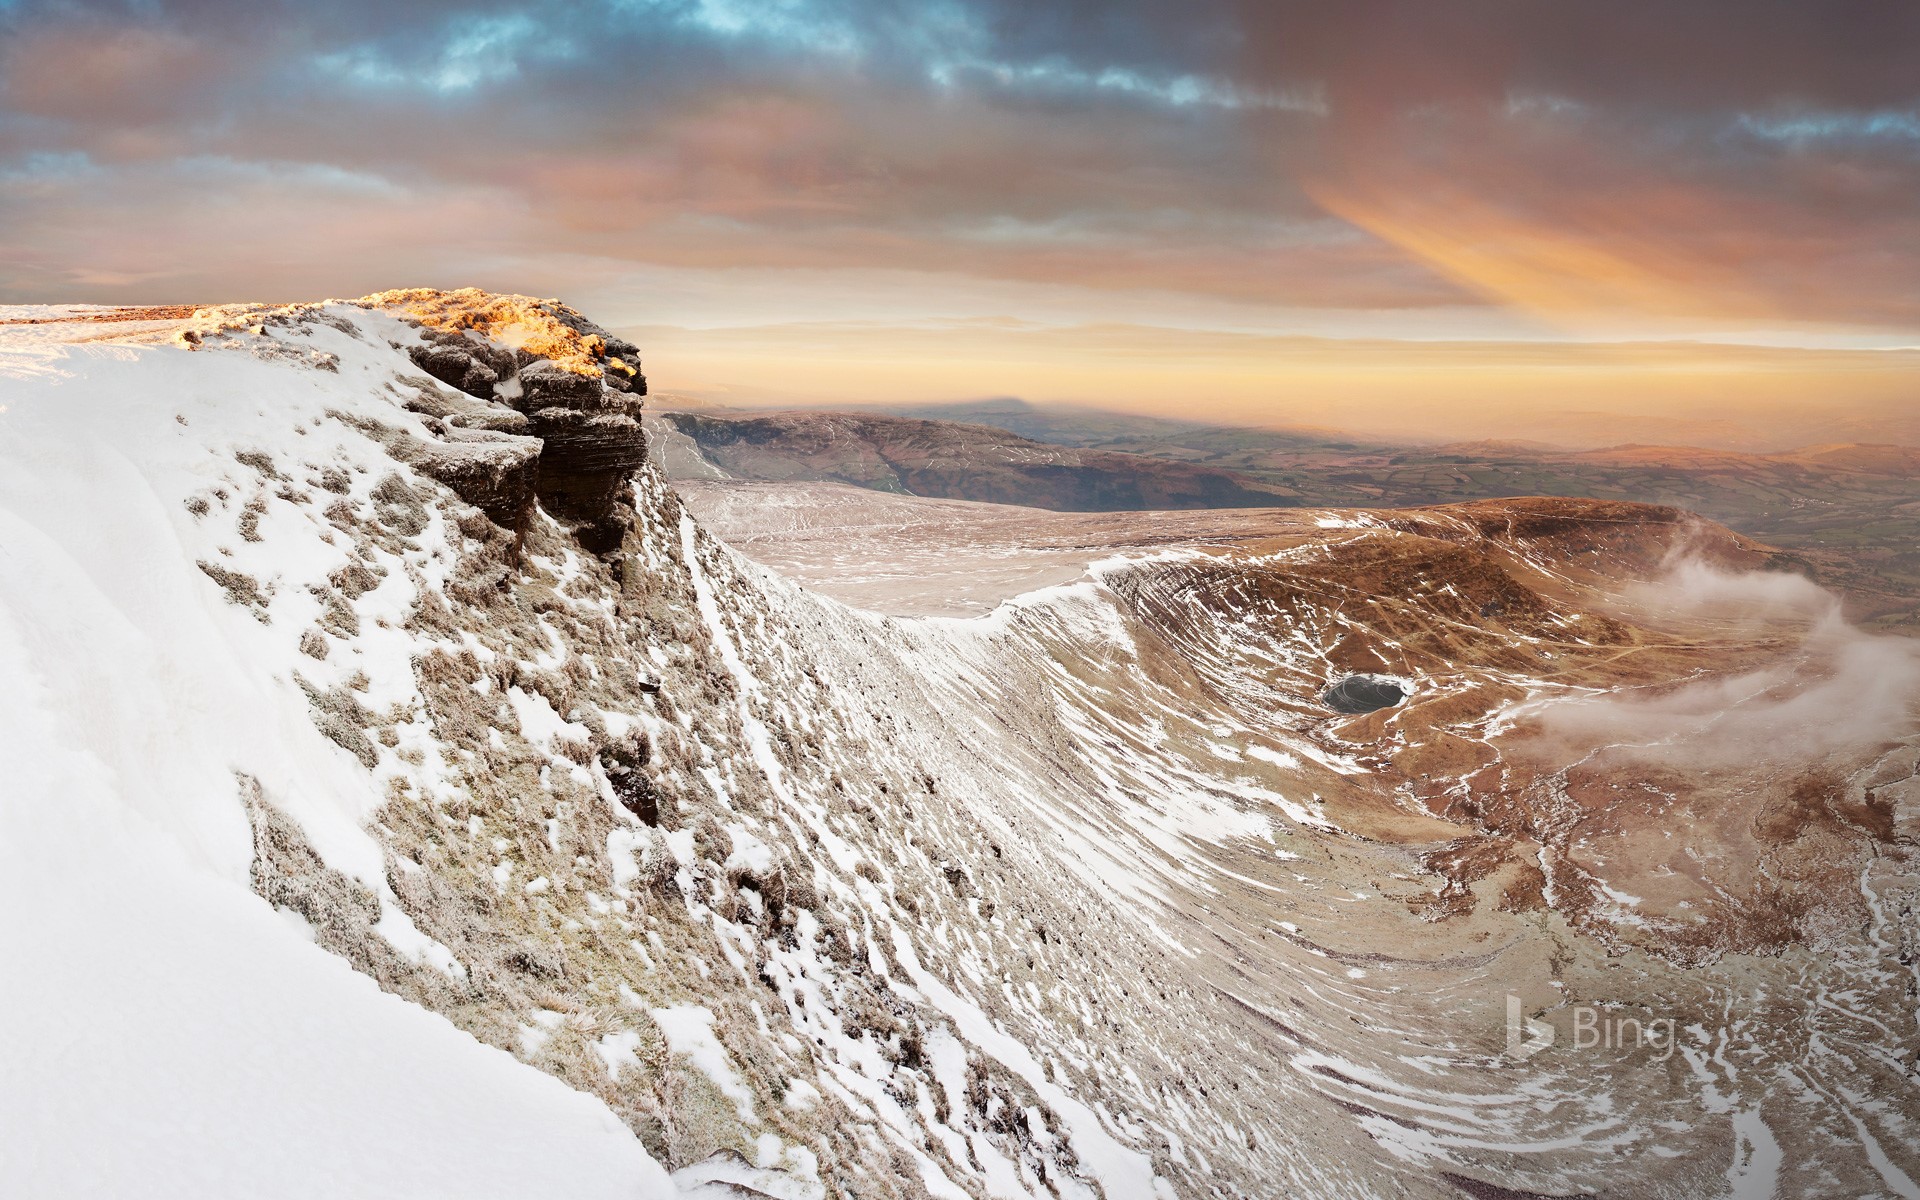 Pen y Fan in the Brecon Beacons National Park, South Wales